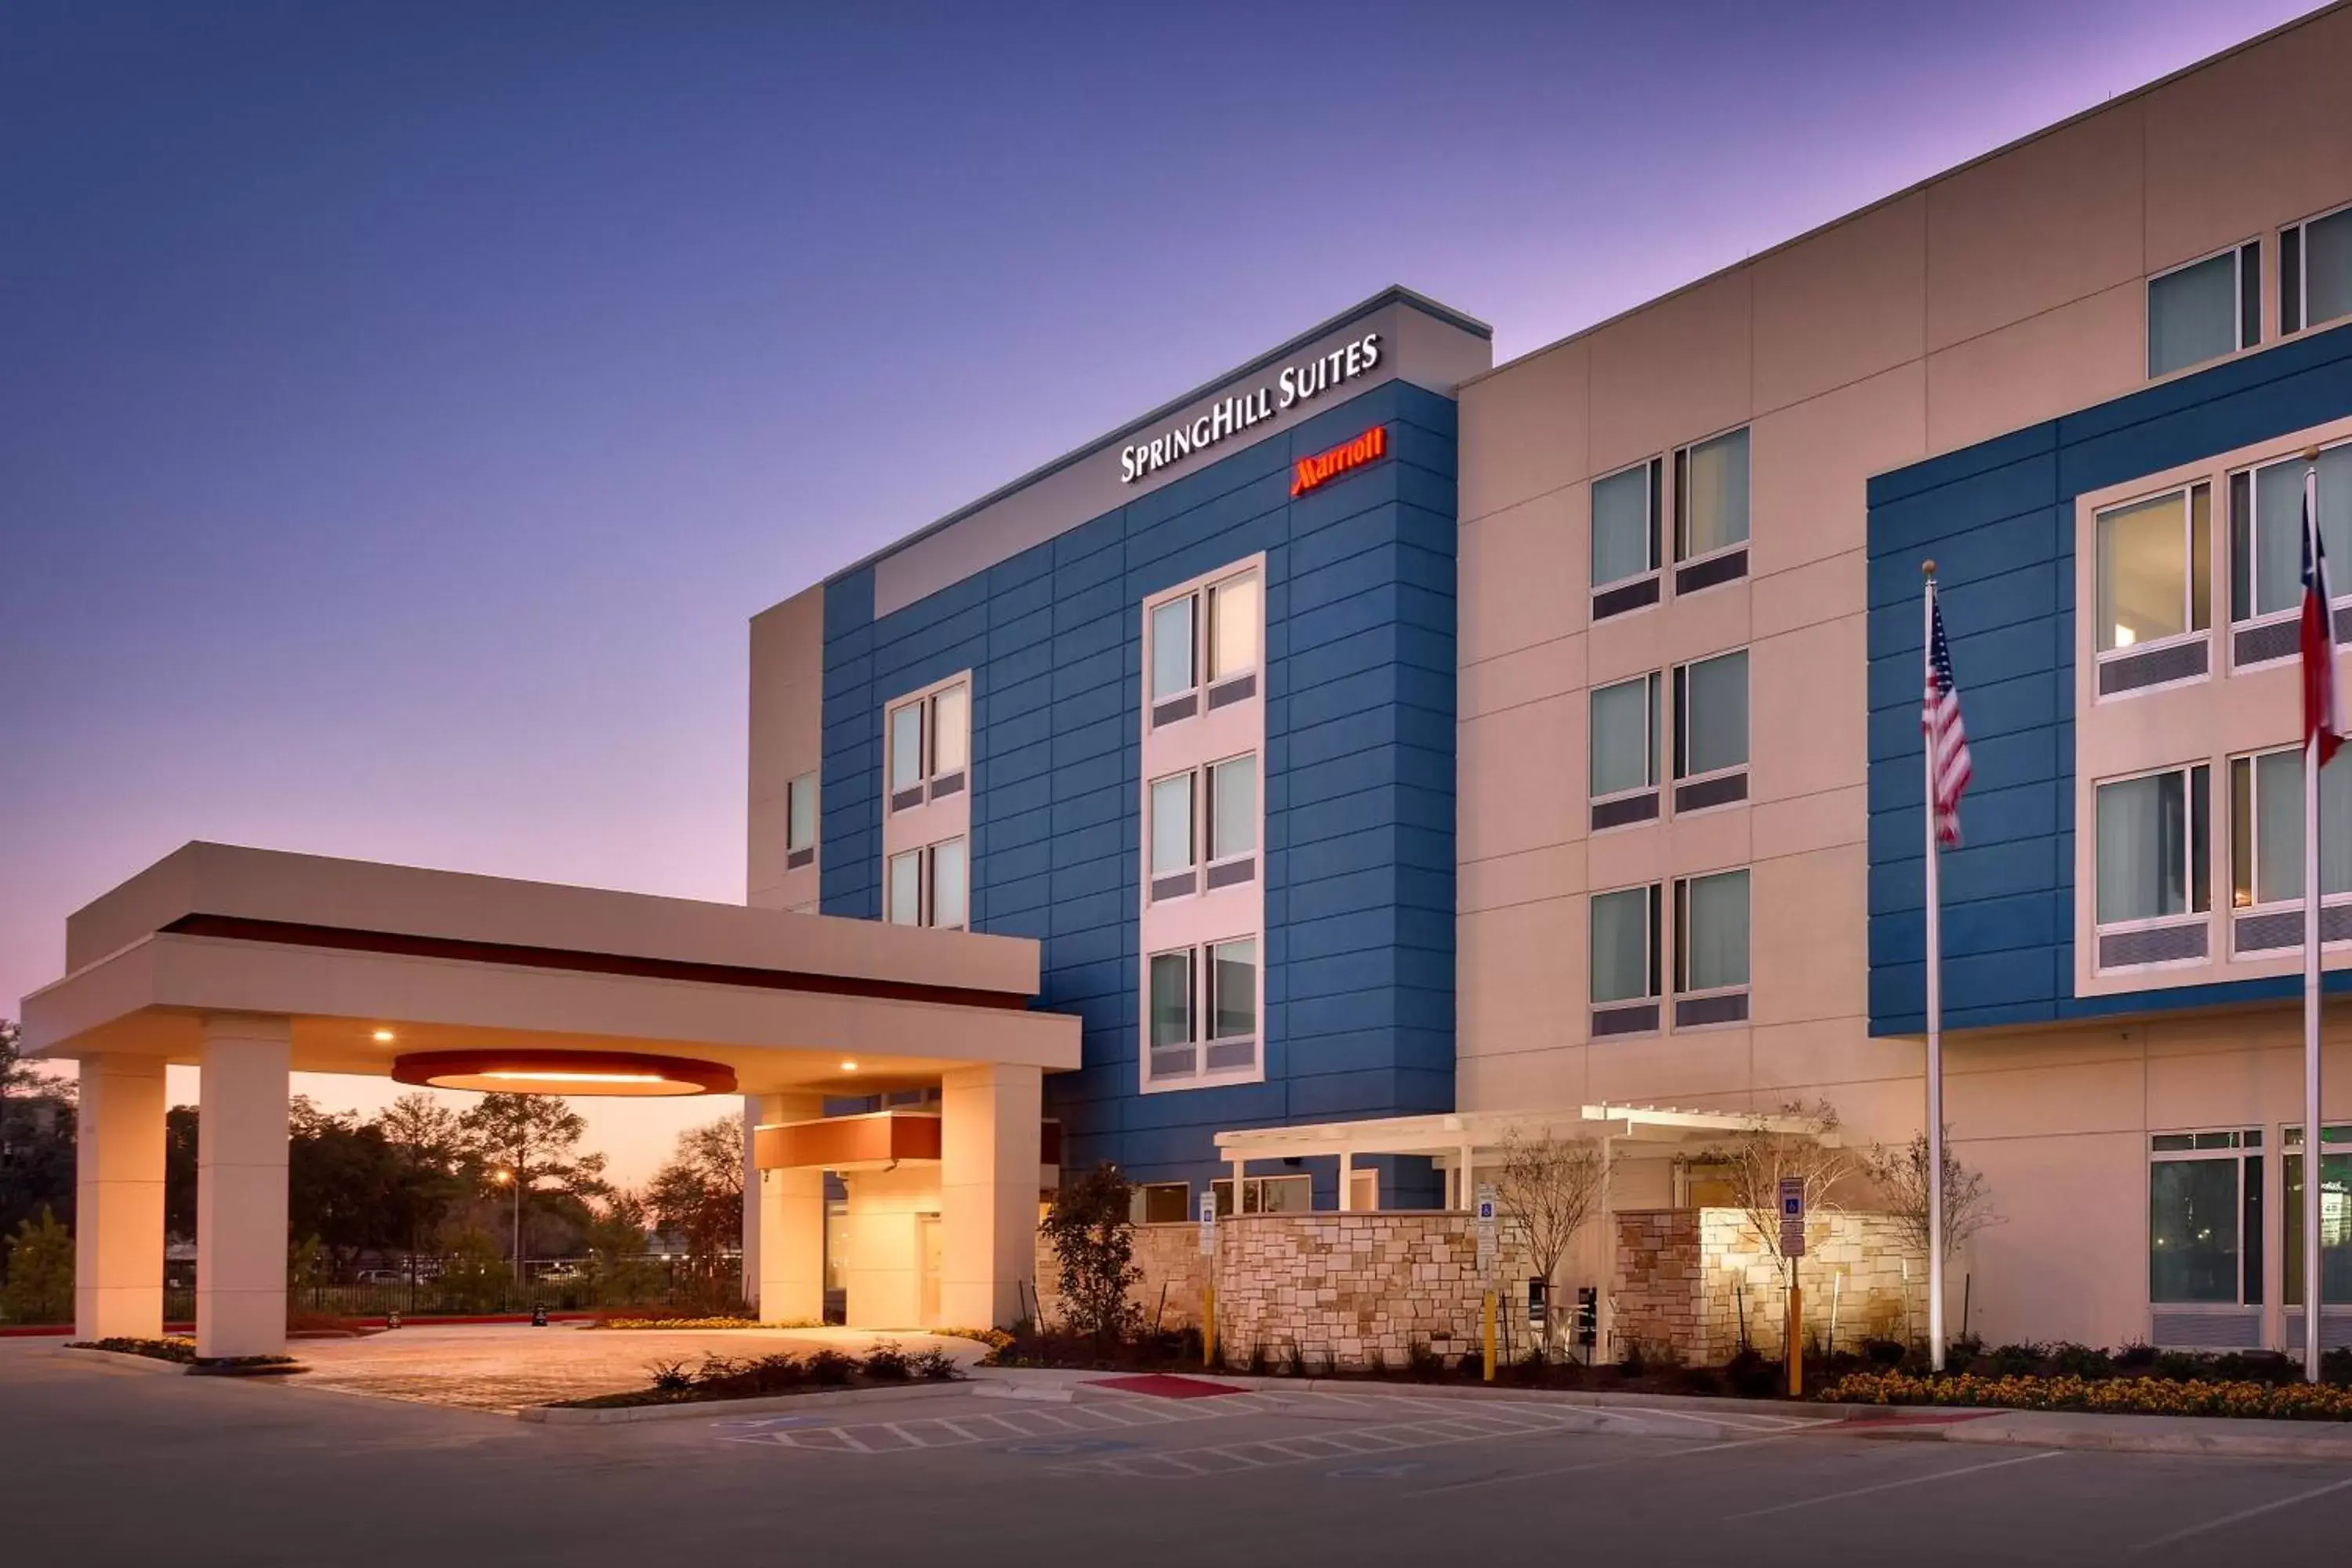 Property Building in SpringHill Suites by Marriott Houston I-45 North